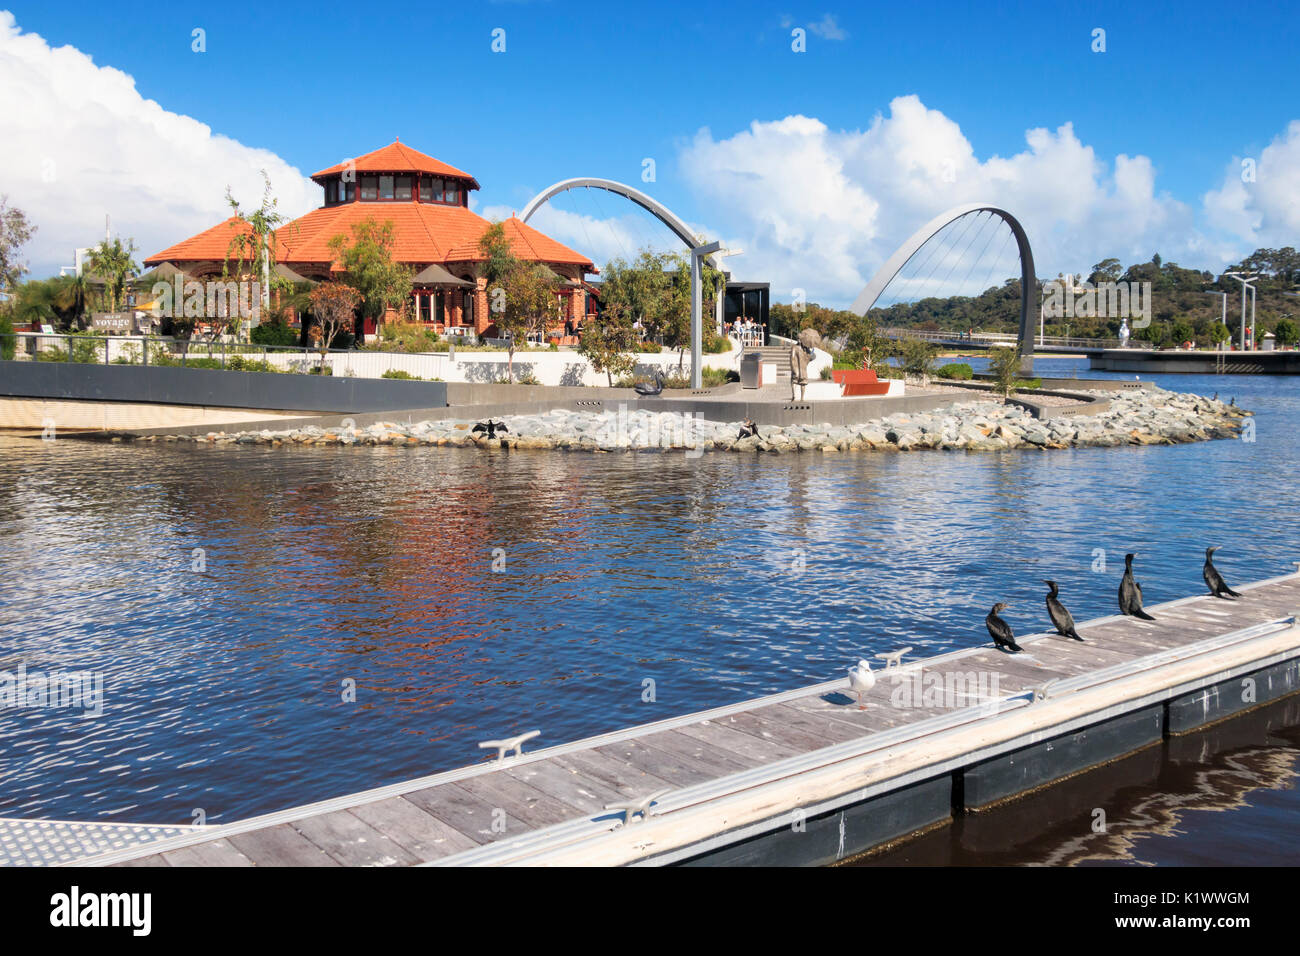 The relocated historic Florence Hummerston Kiosk, now a restaurant bar, on the Island at Elizabeth Quay, Perth, Western Australia Stock Photo